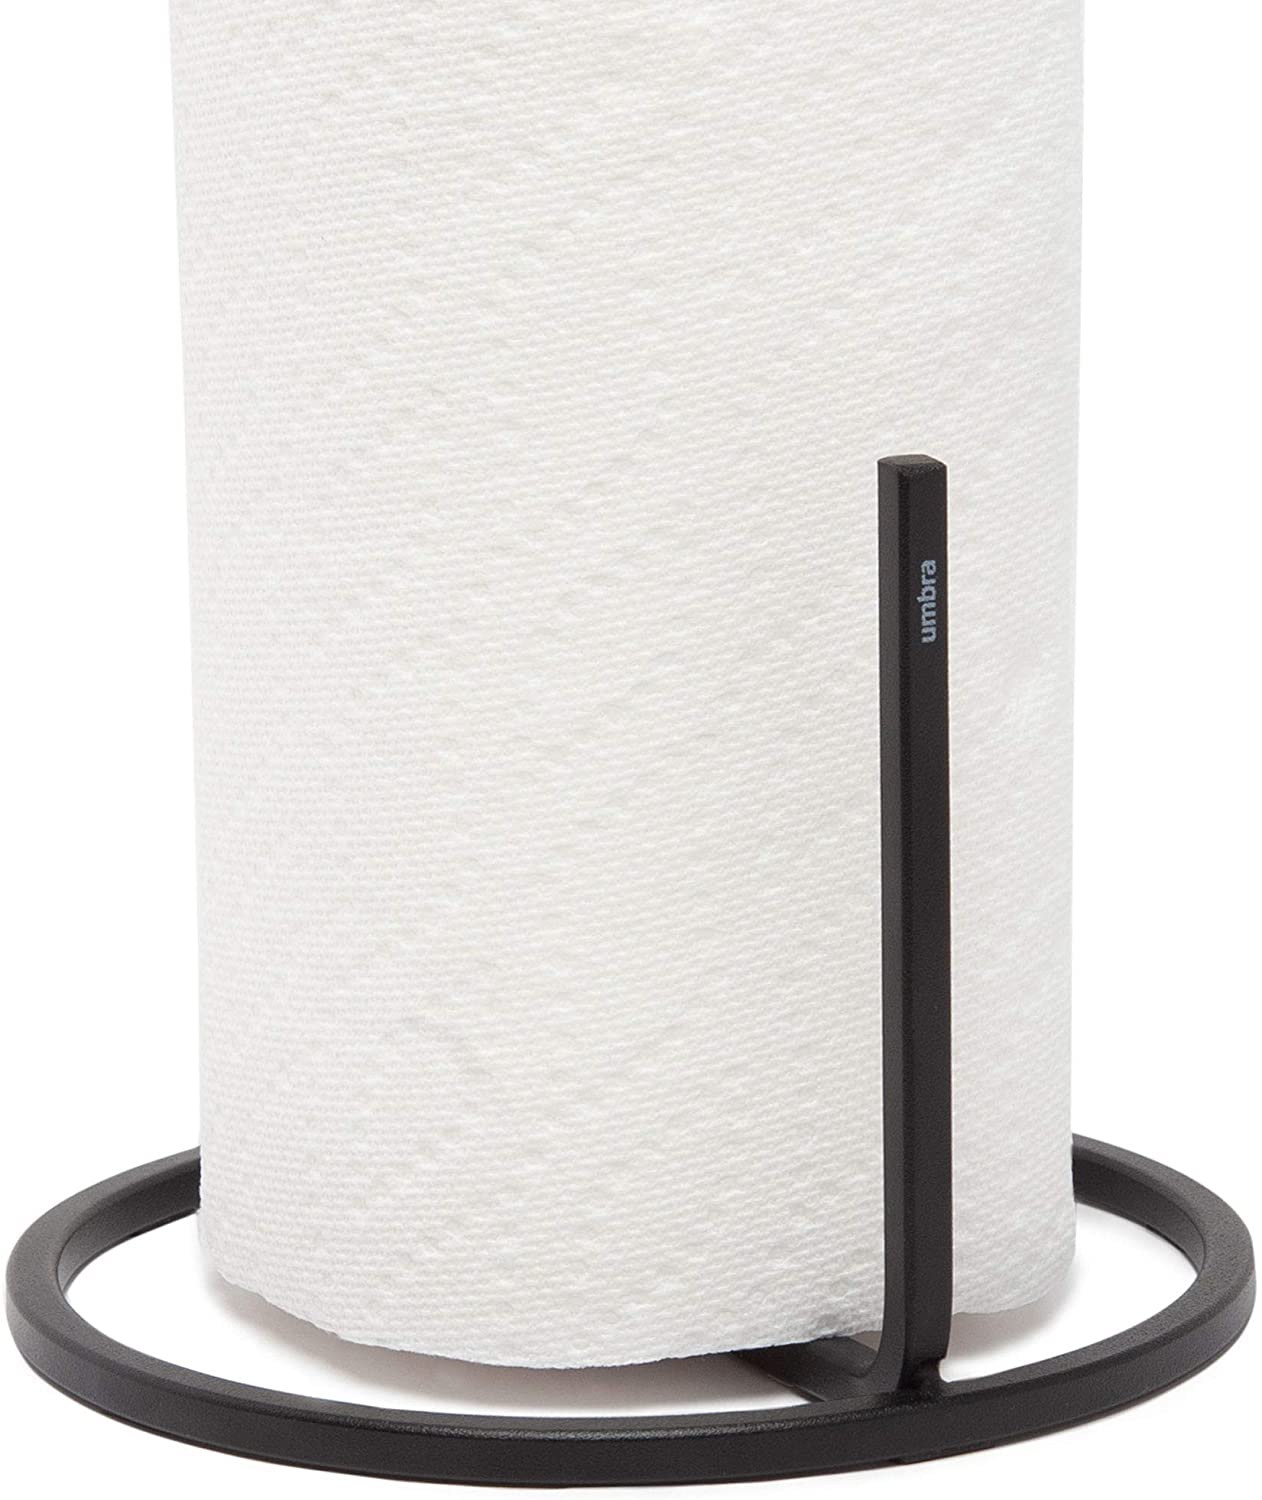 
Umbra Squire Stand-Up Paper Towel Holder with Bent Metal Wire Design and Black Finish for Kitchen or Bathroom 5